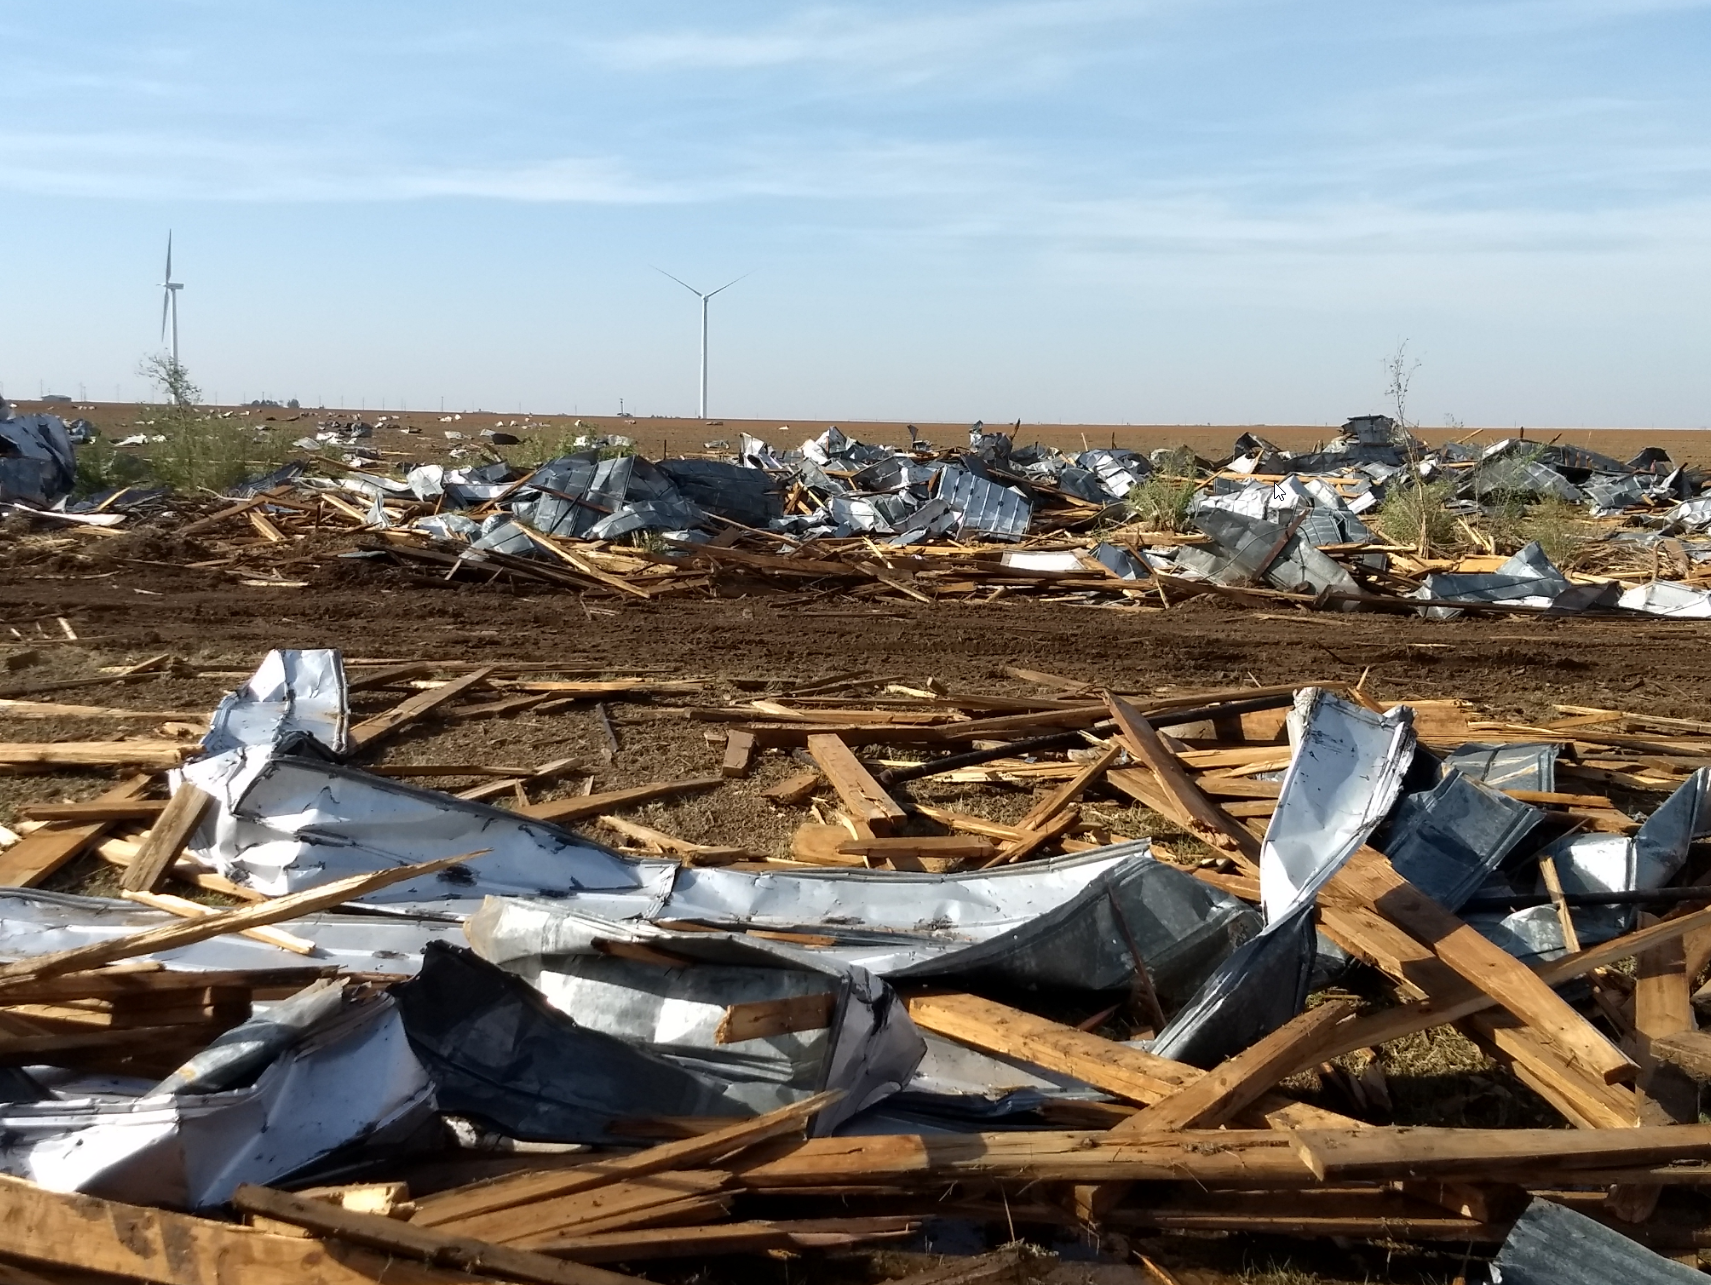 Damage sustained at the Ralls Compress in Ralls, TX, on the evening of 1 June 2018.